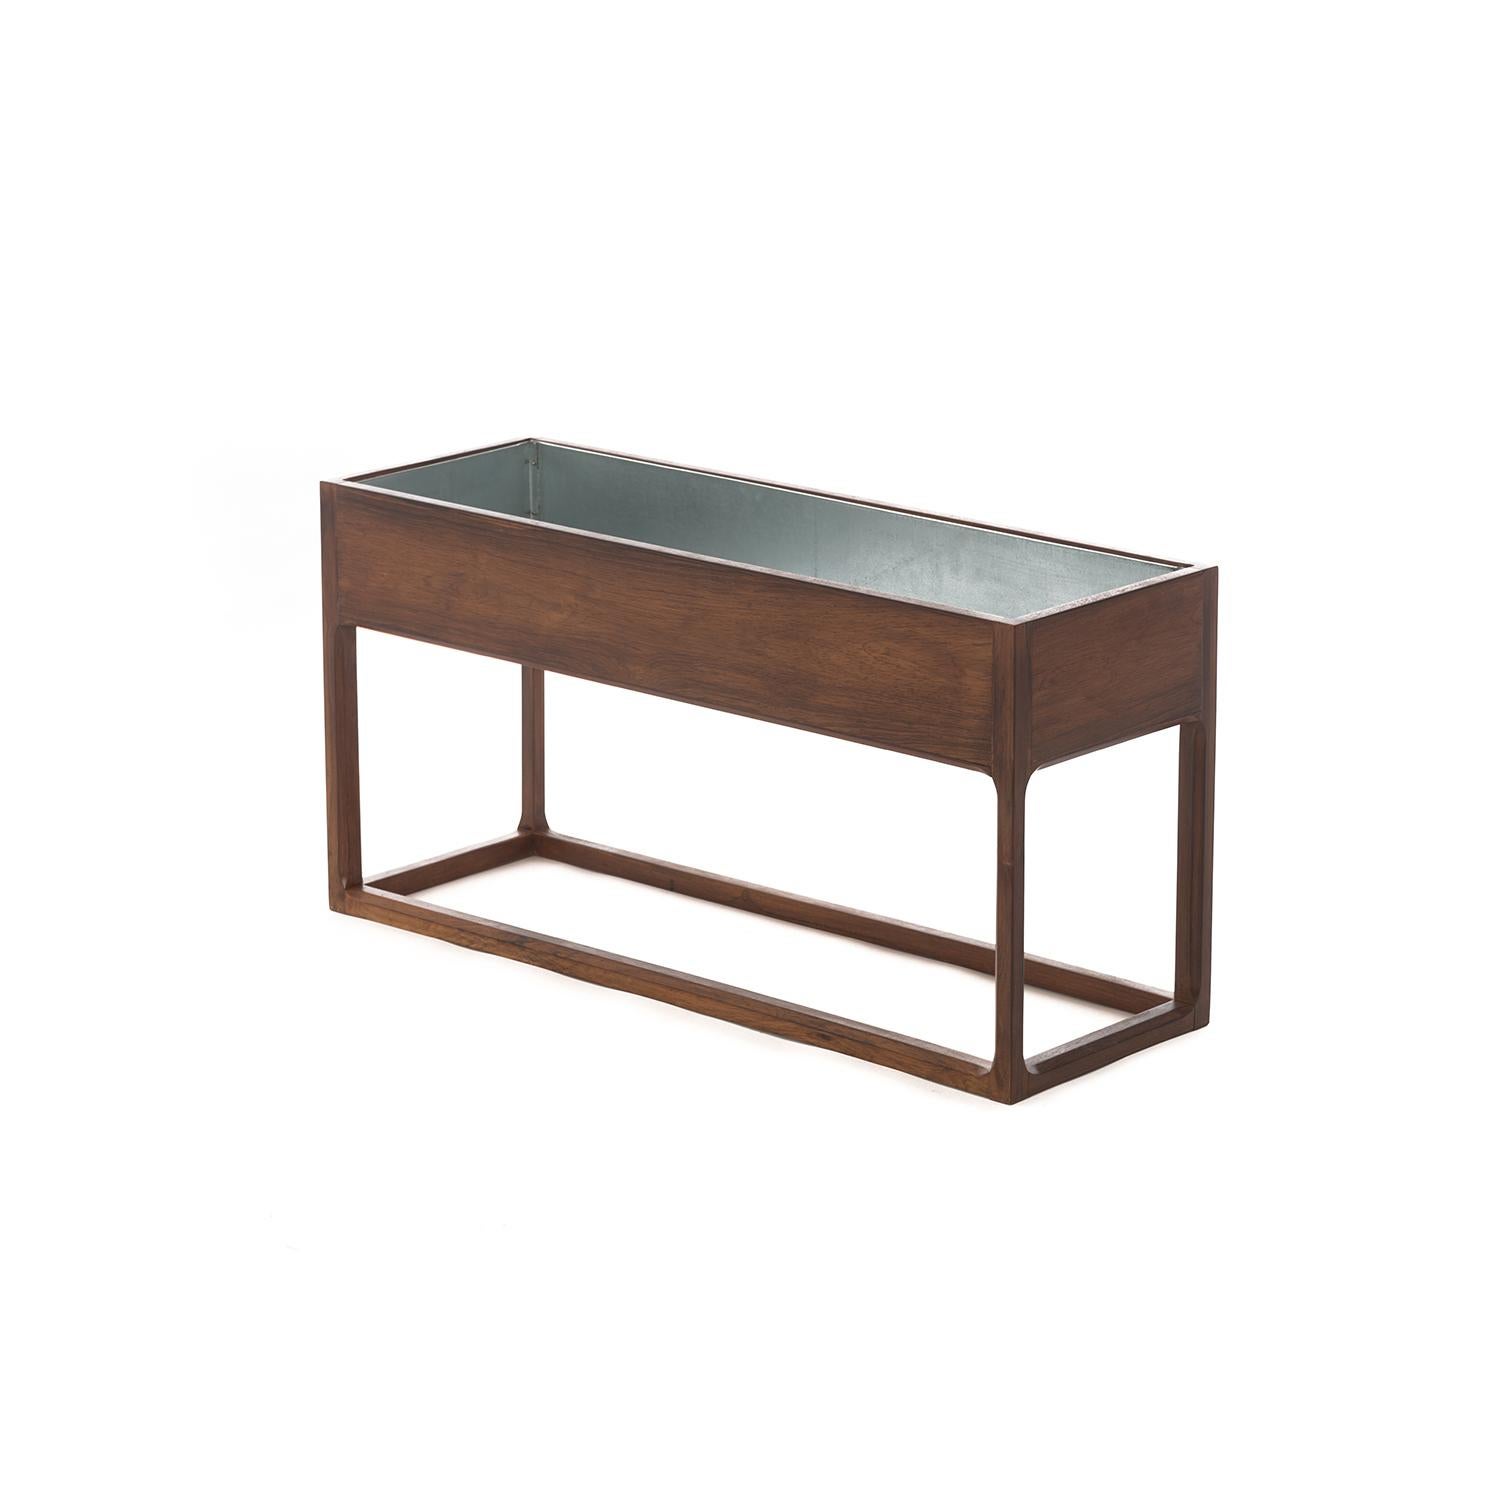 This elegant planter features a frame style base with a jewel-cutout detail on the inner legs. Rosewood is deeply figured and finished in a durable lacquer, which has been updated. Aluminum liner is removable for easy cleaning. Perfect to set pots